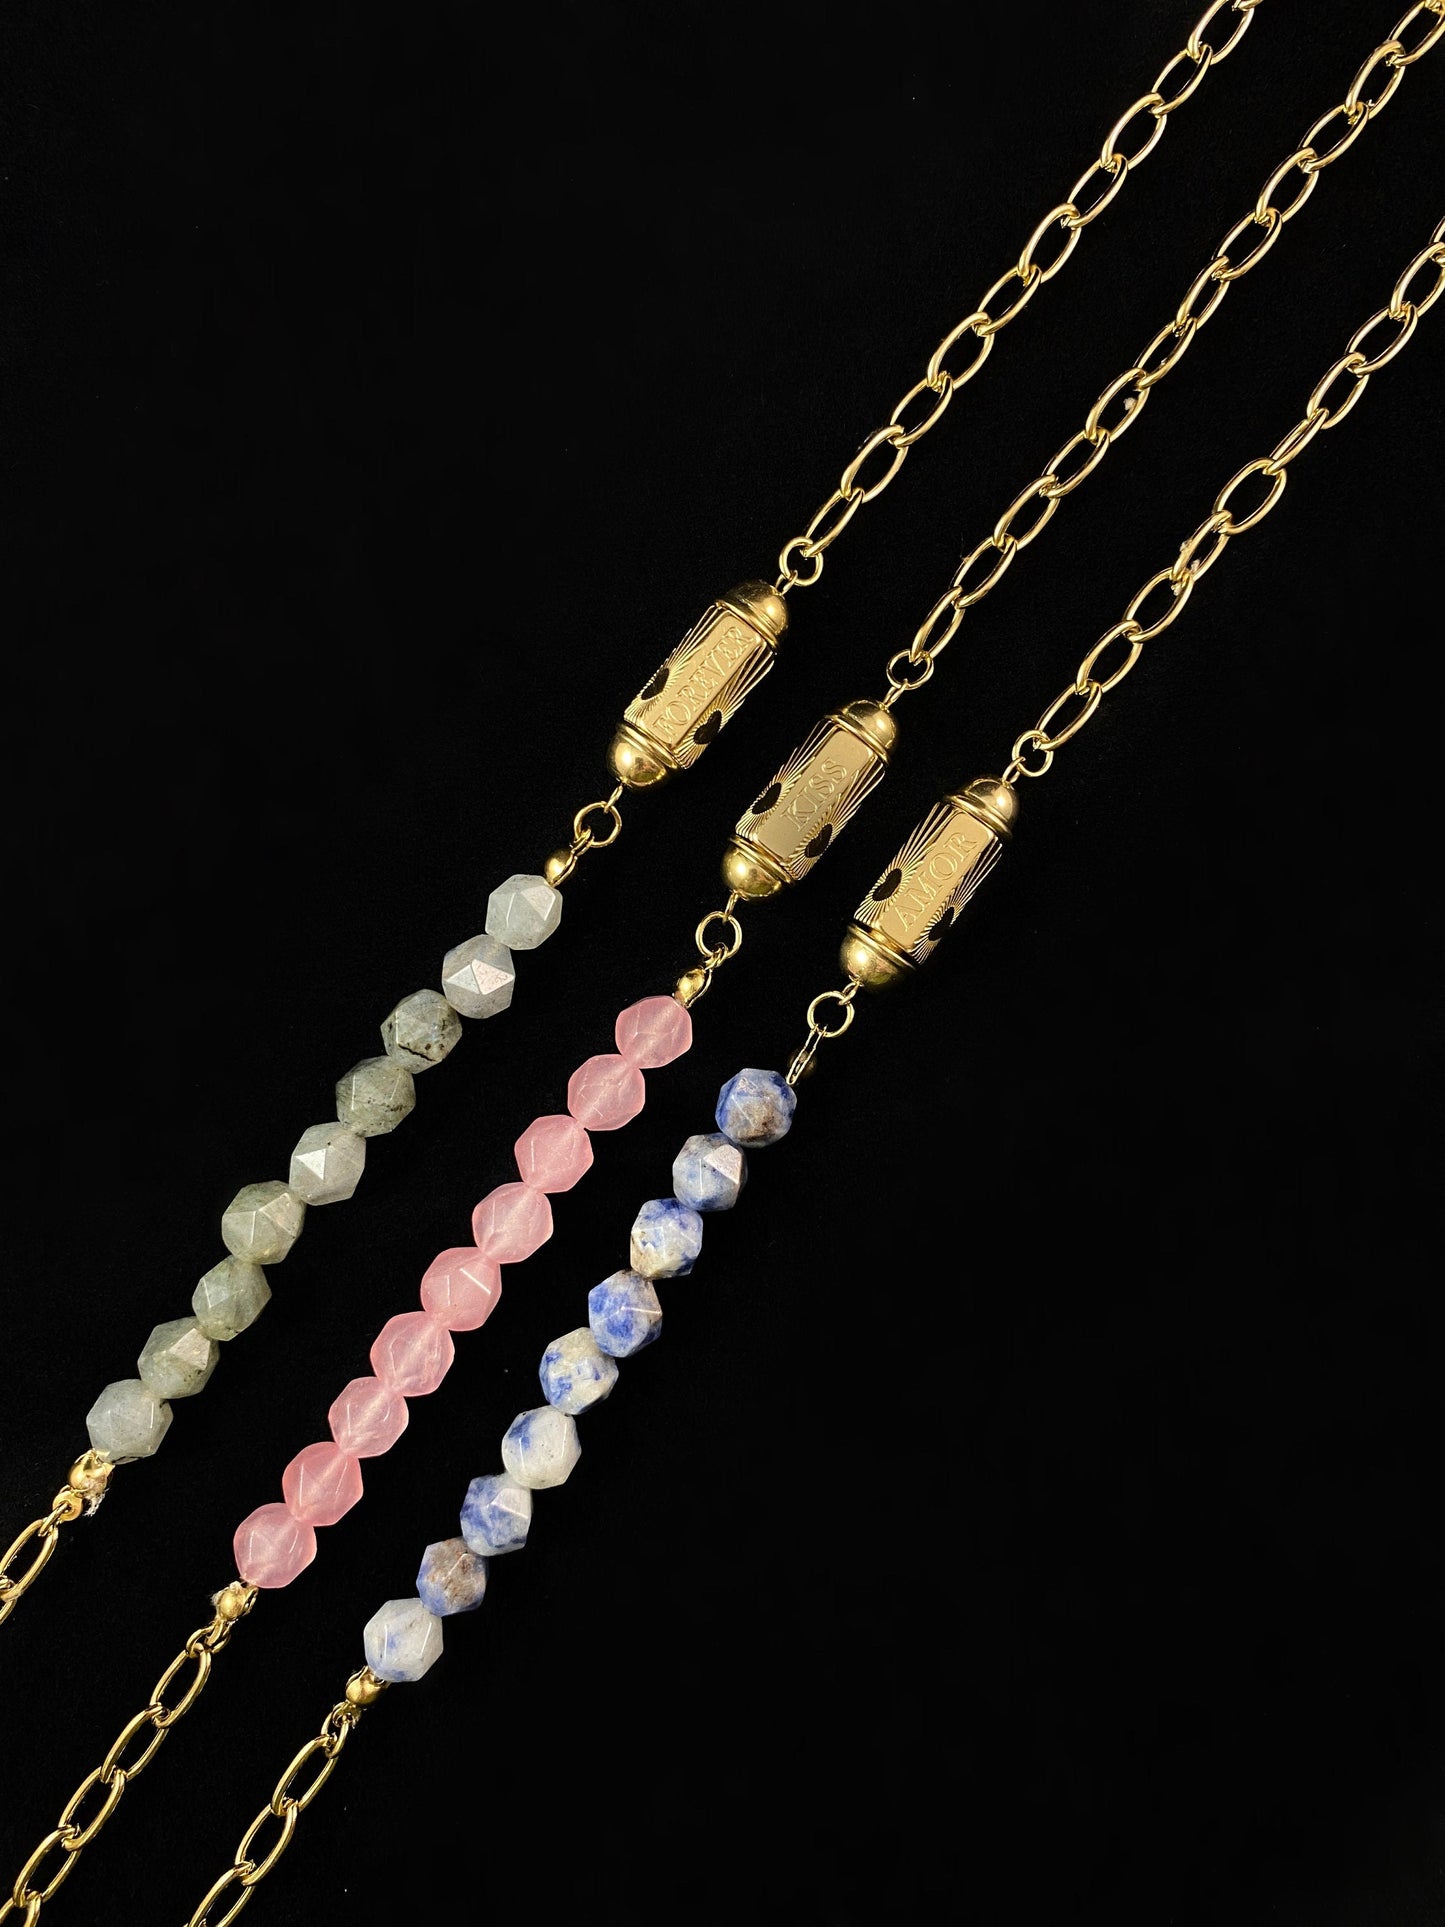 Pink Natural Stone Necklace with Love/Kiss Calligraphy and Dainty Gold Heart Detailing